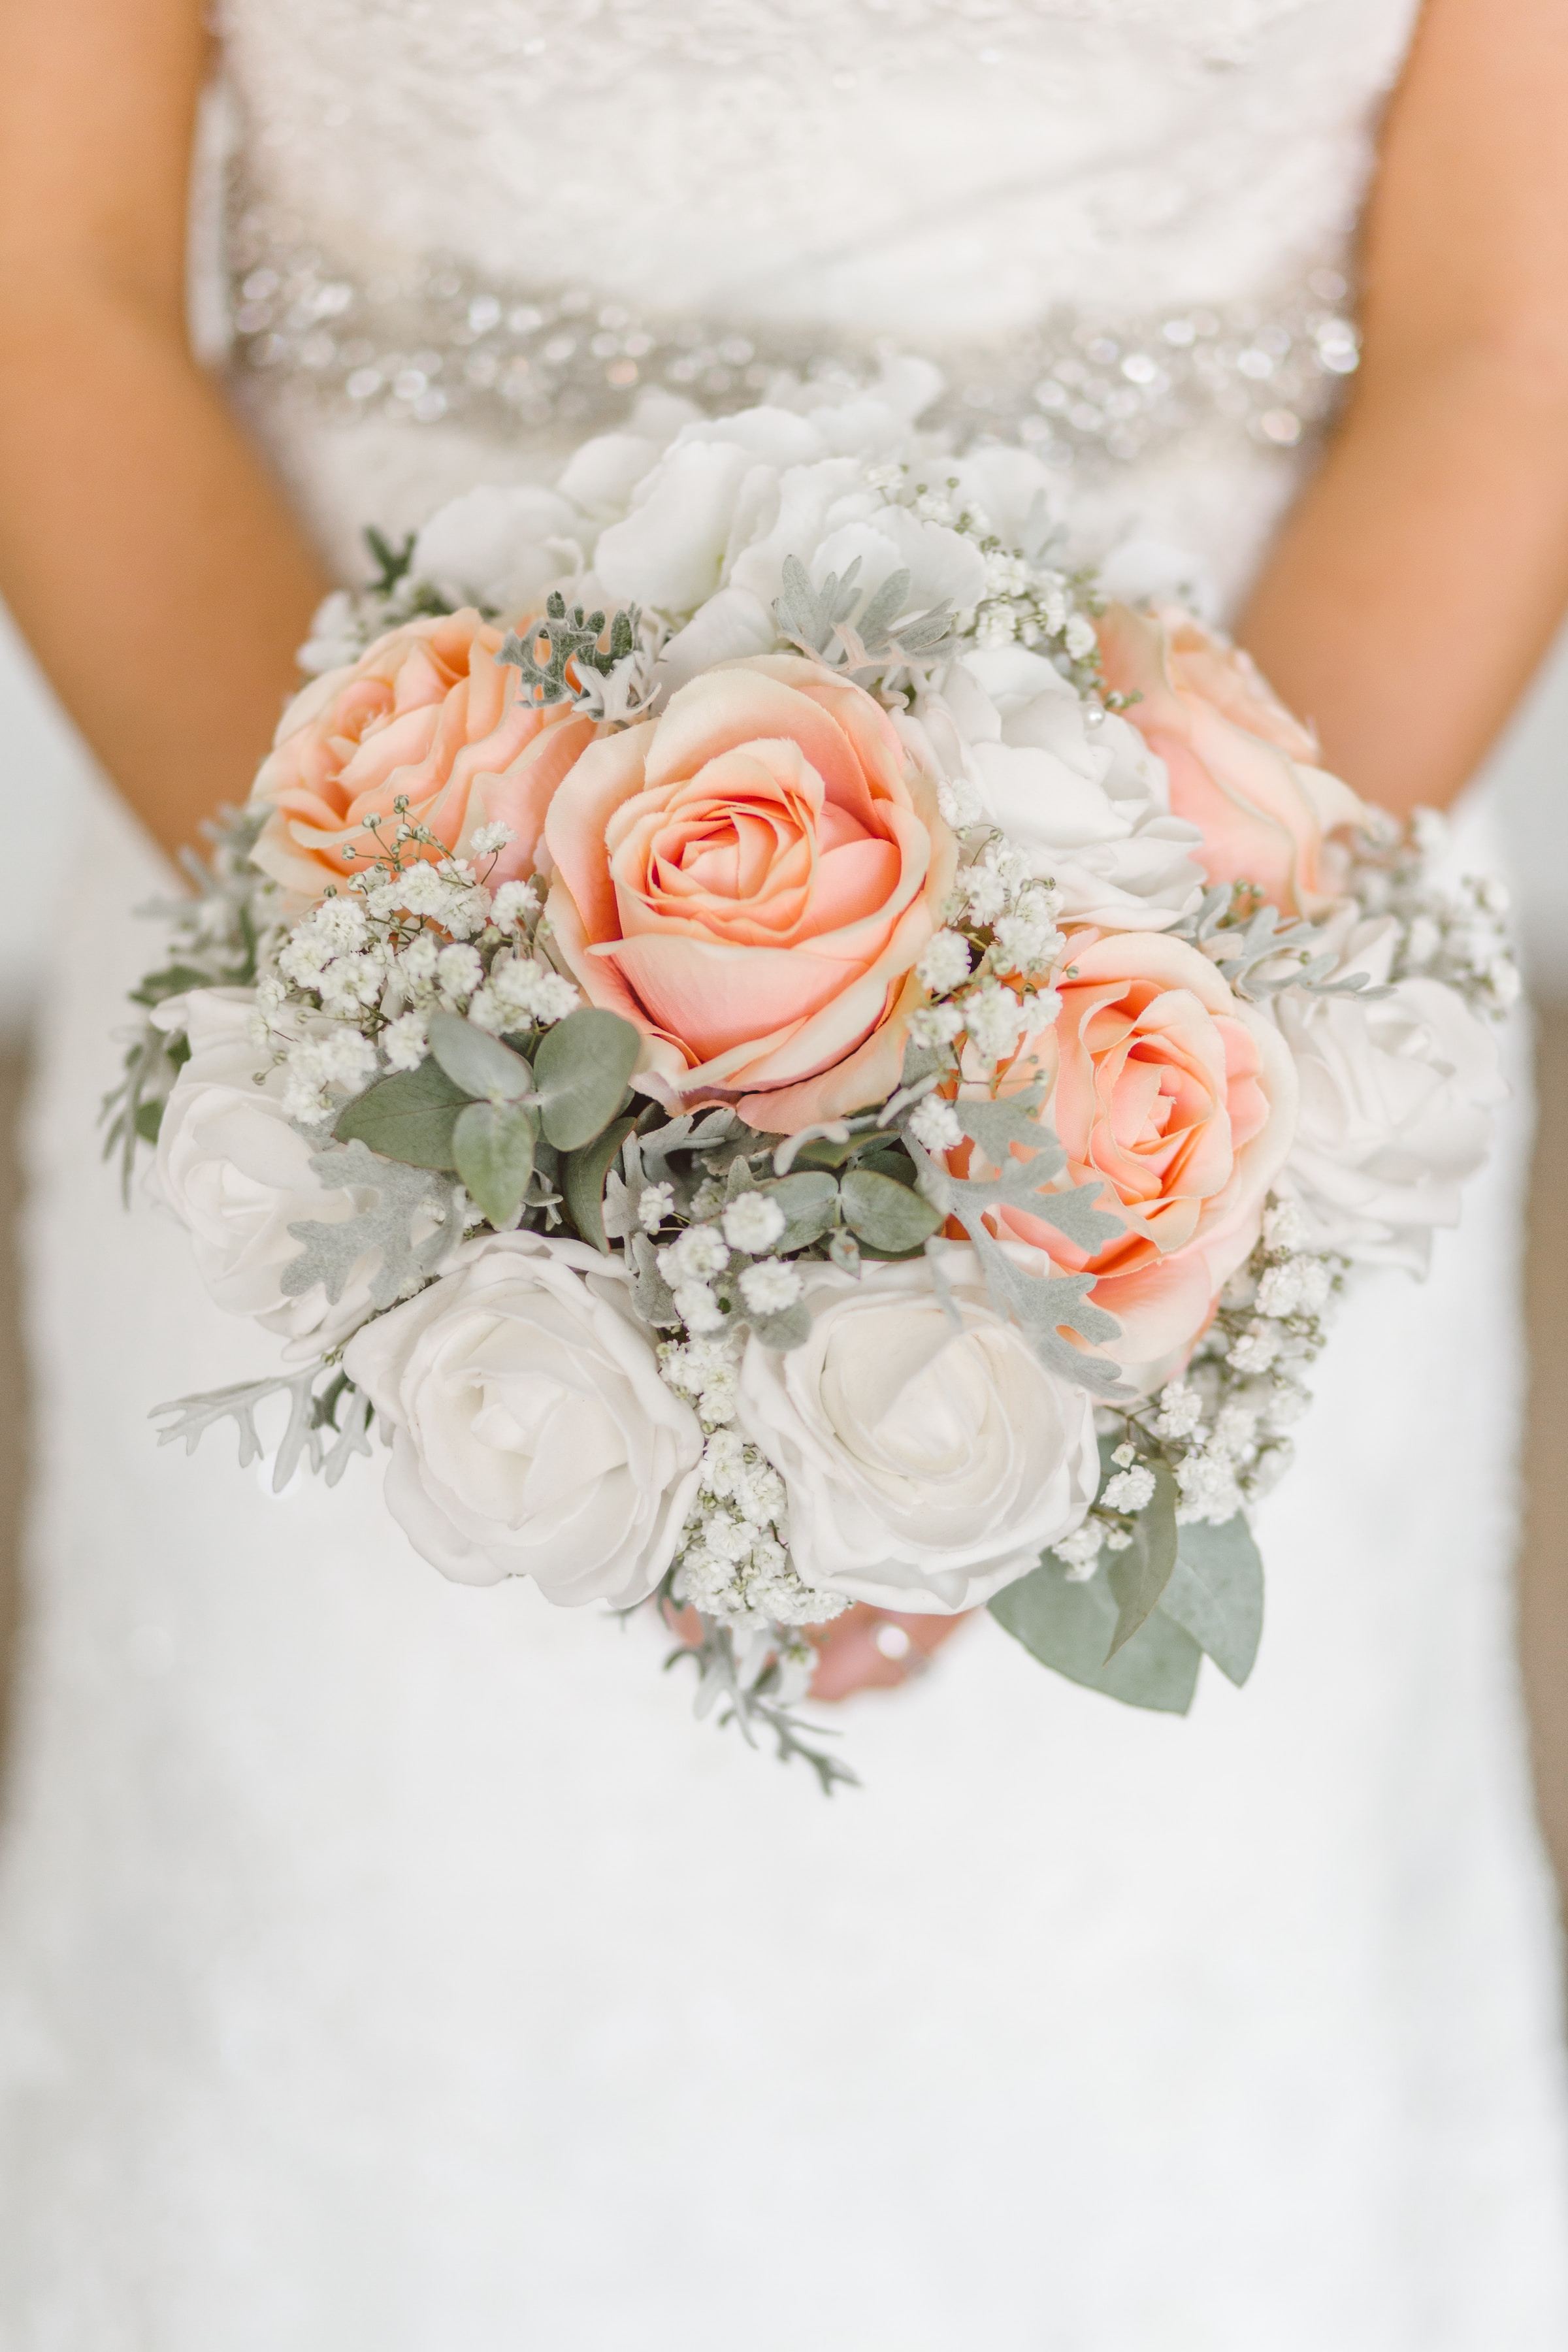 A bride in a white wedding gown holding flowers | Source: Unsplash